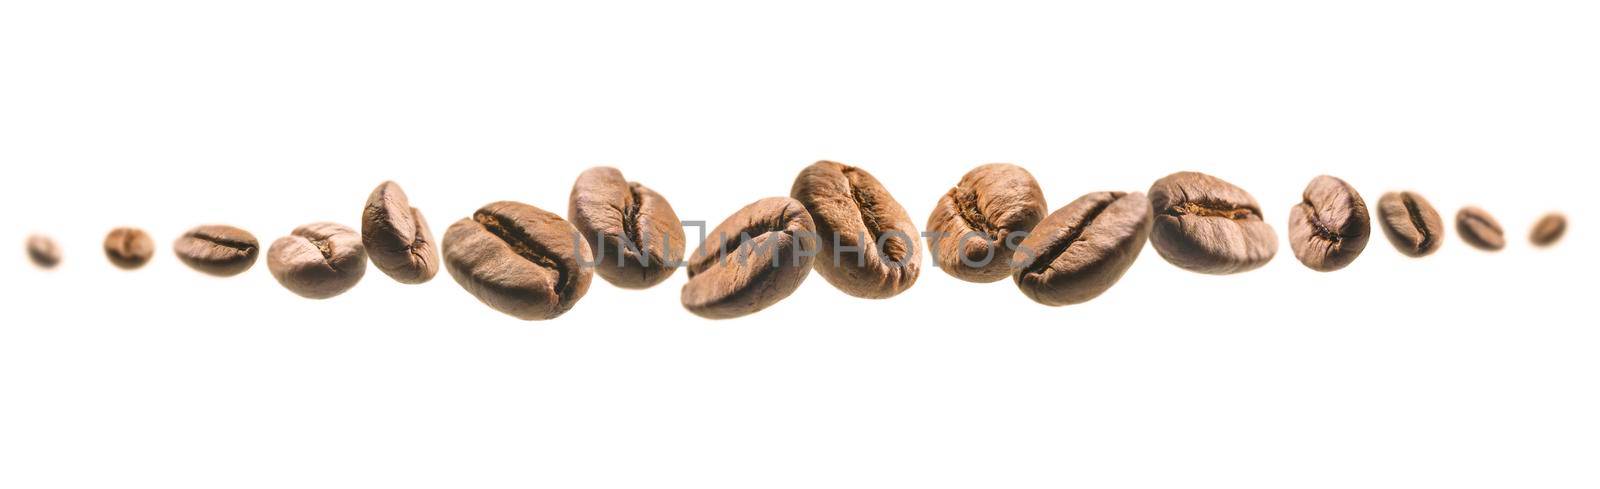 Coffee beans levitate on a white background by butenkow